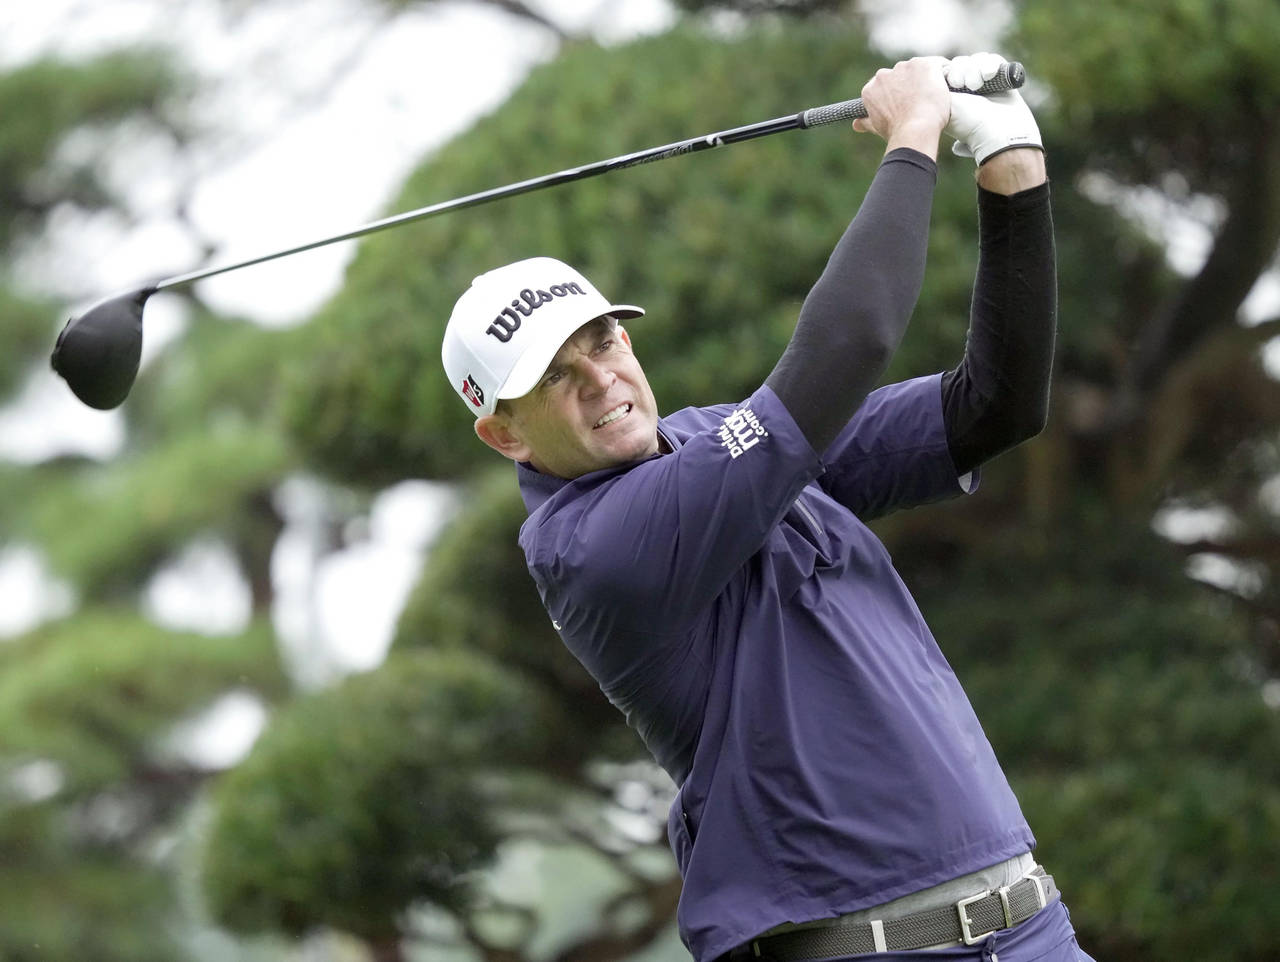 Brendan Steele plays a shot at the Zozo Championship in Inzai, Chiba prefecture, Japan Thursday, Oc...